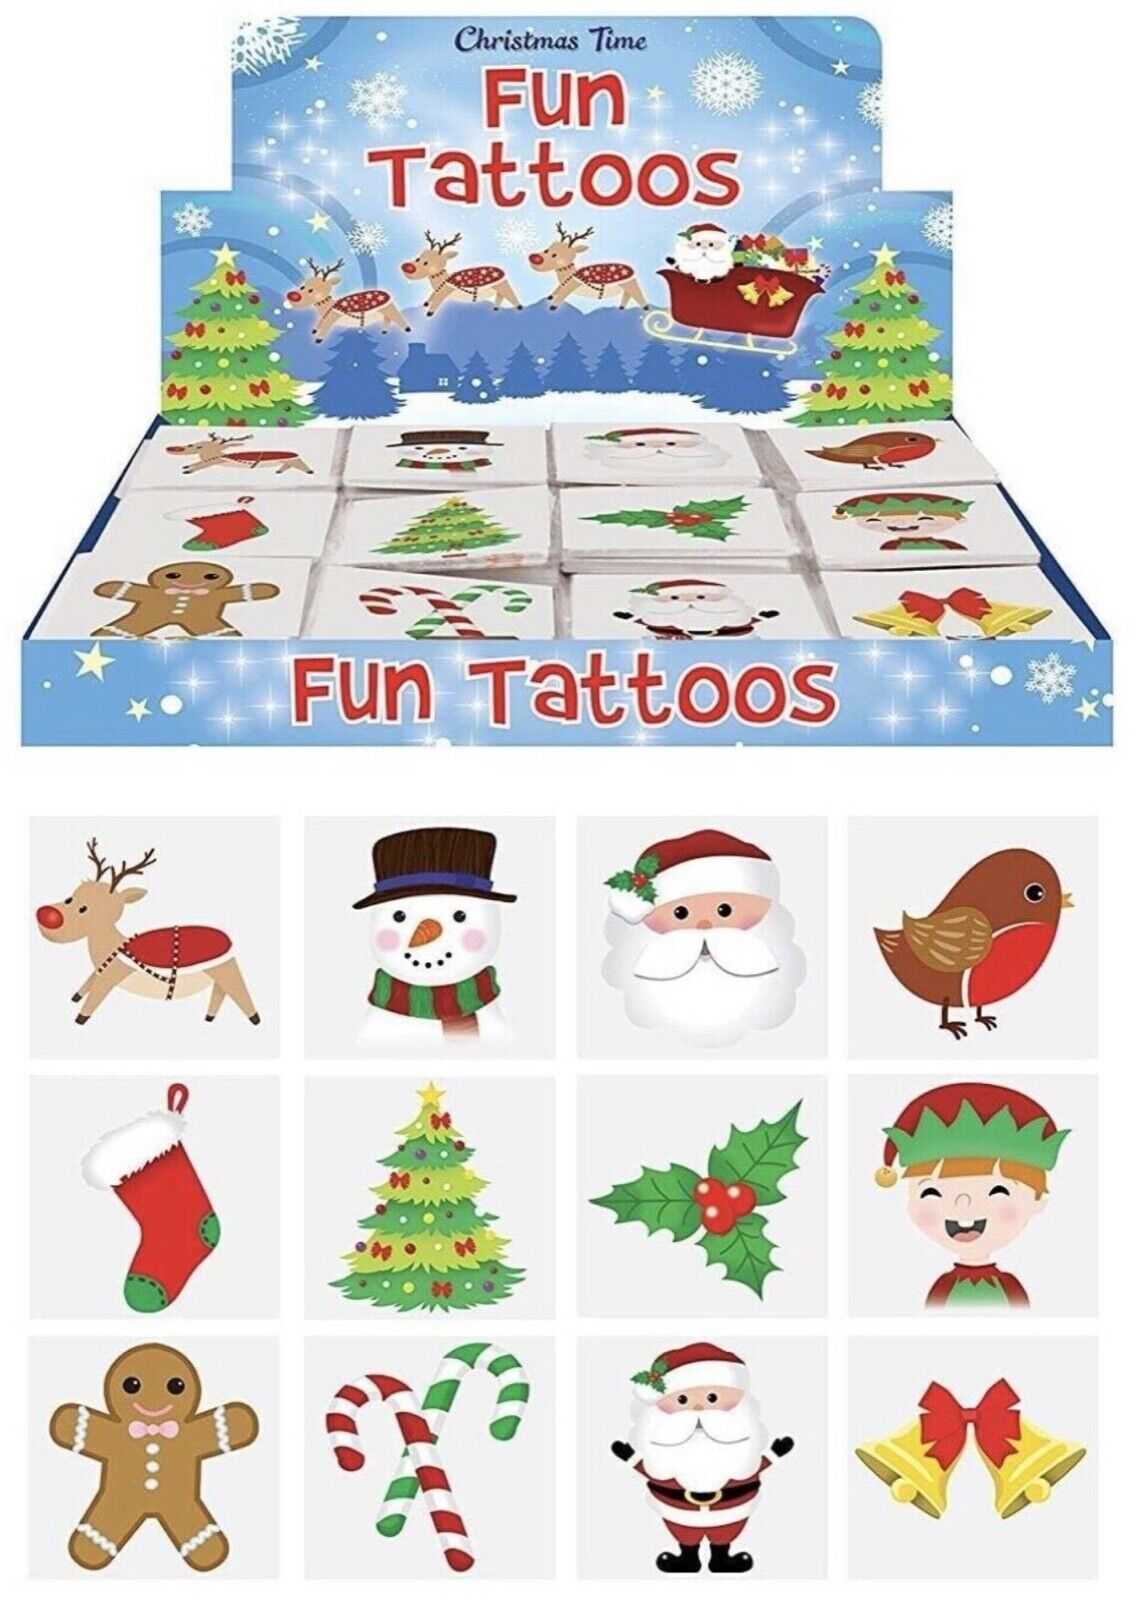 48x Henbrandt Christmas Temporary Tattoos for Christmas Stockings Party Fillers